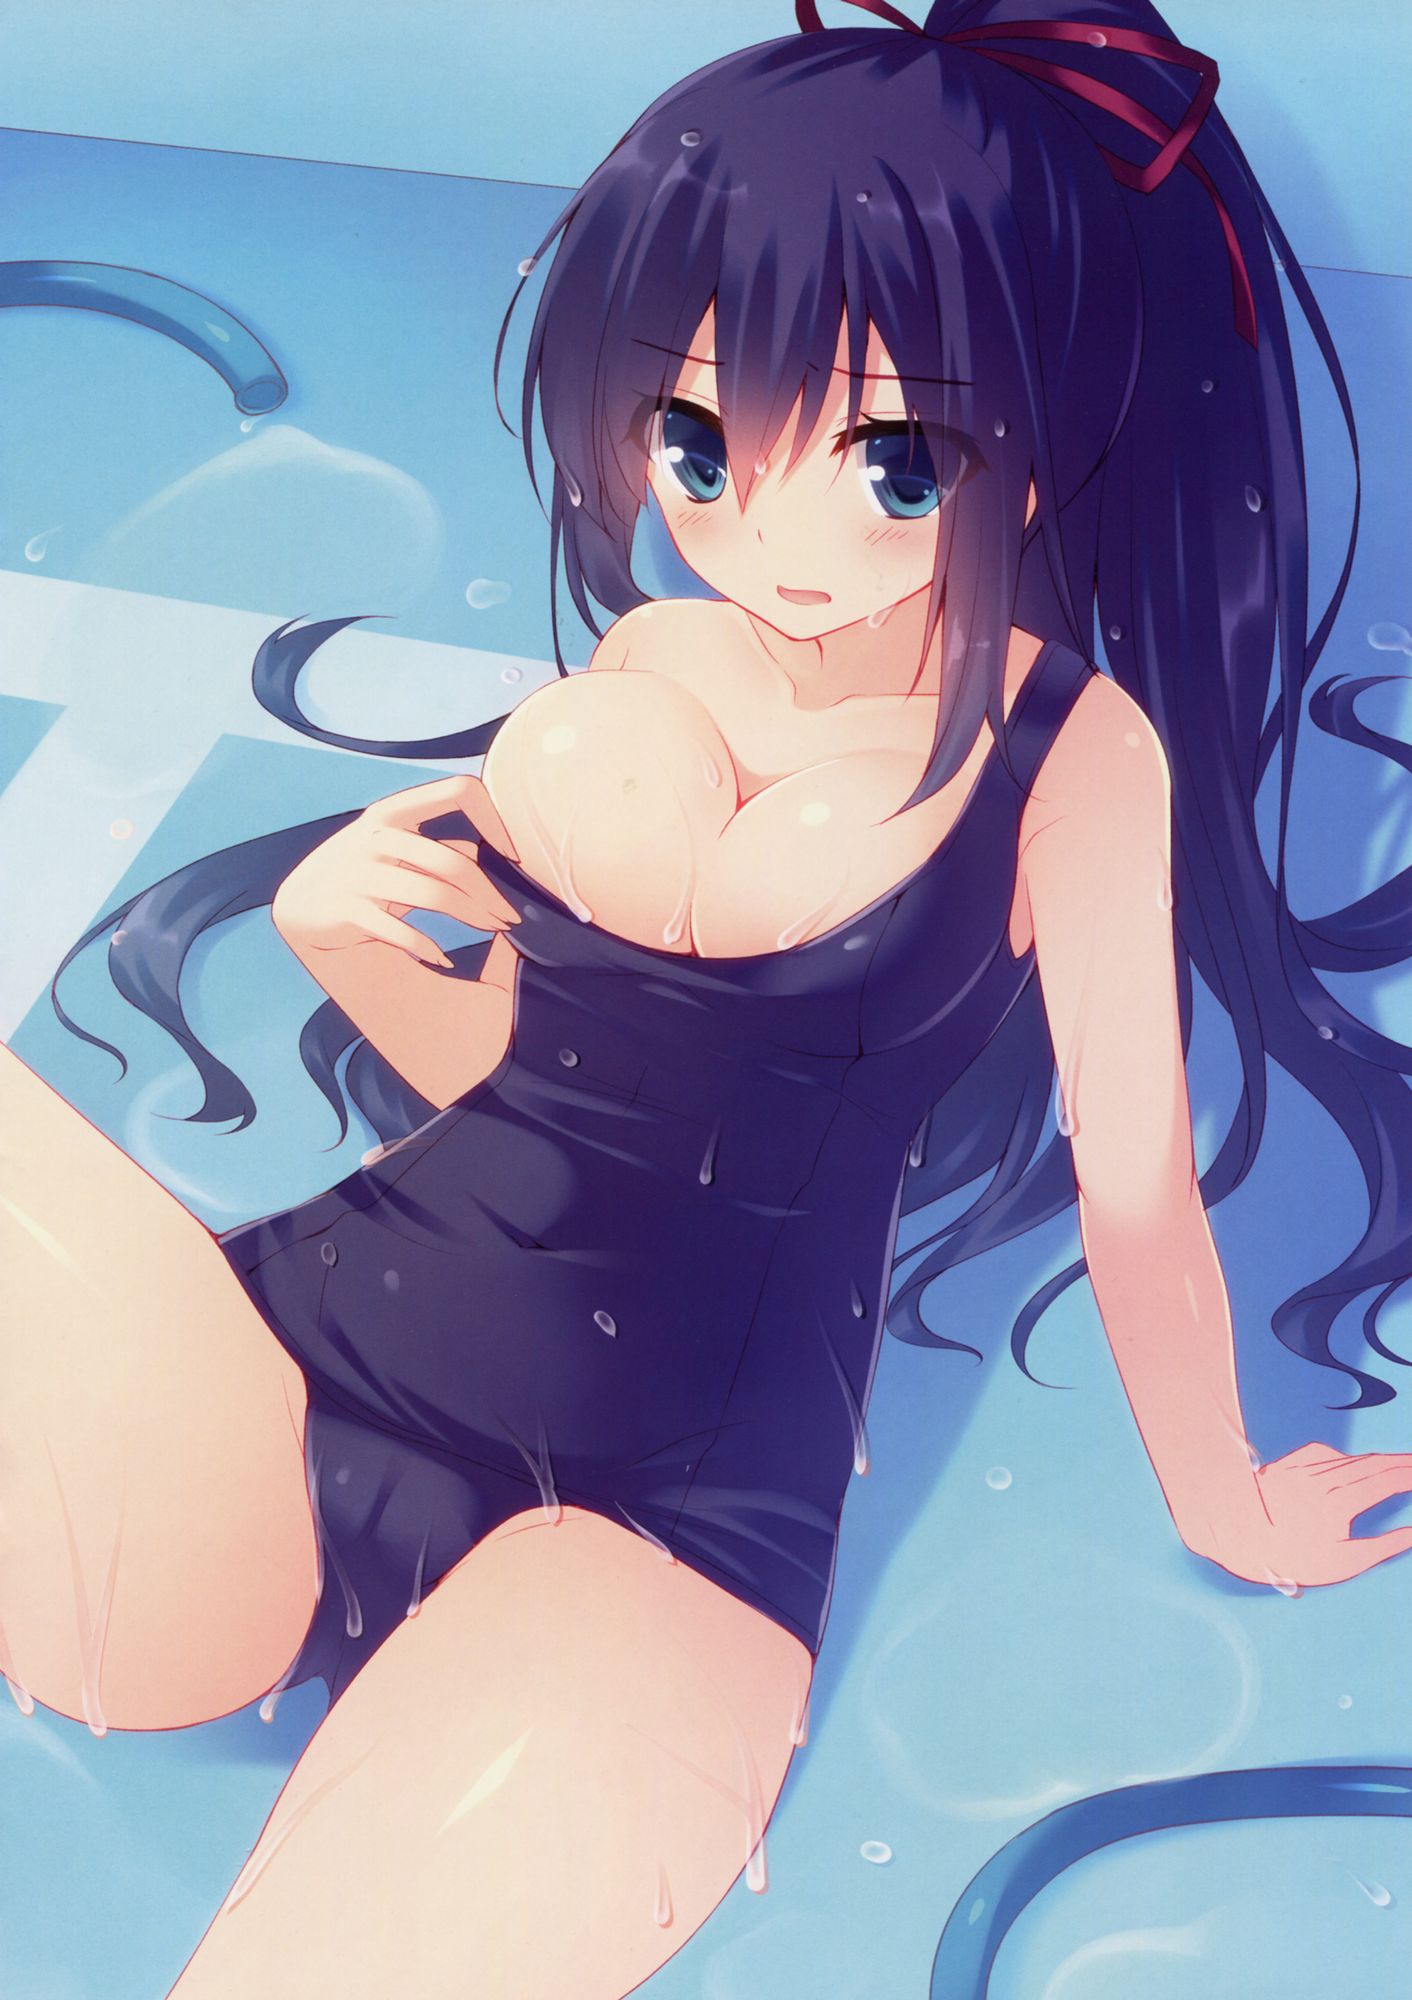 Lewd image of swimsuit with little cloth area I want to expose important parts by shifting the swimsuit 9